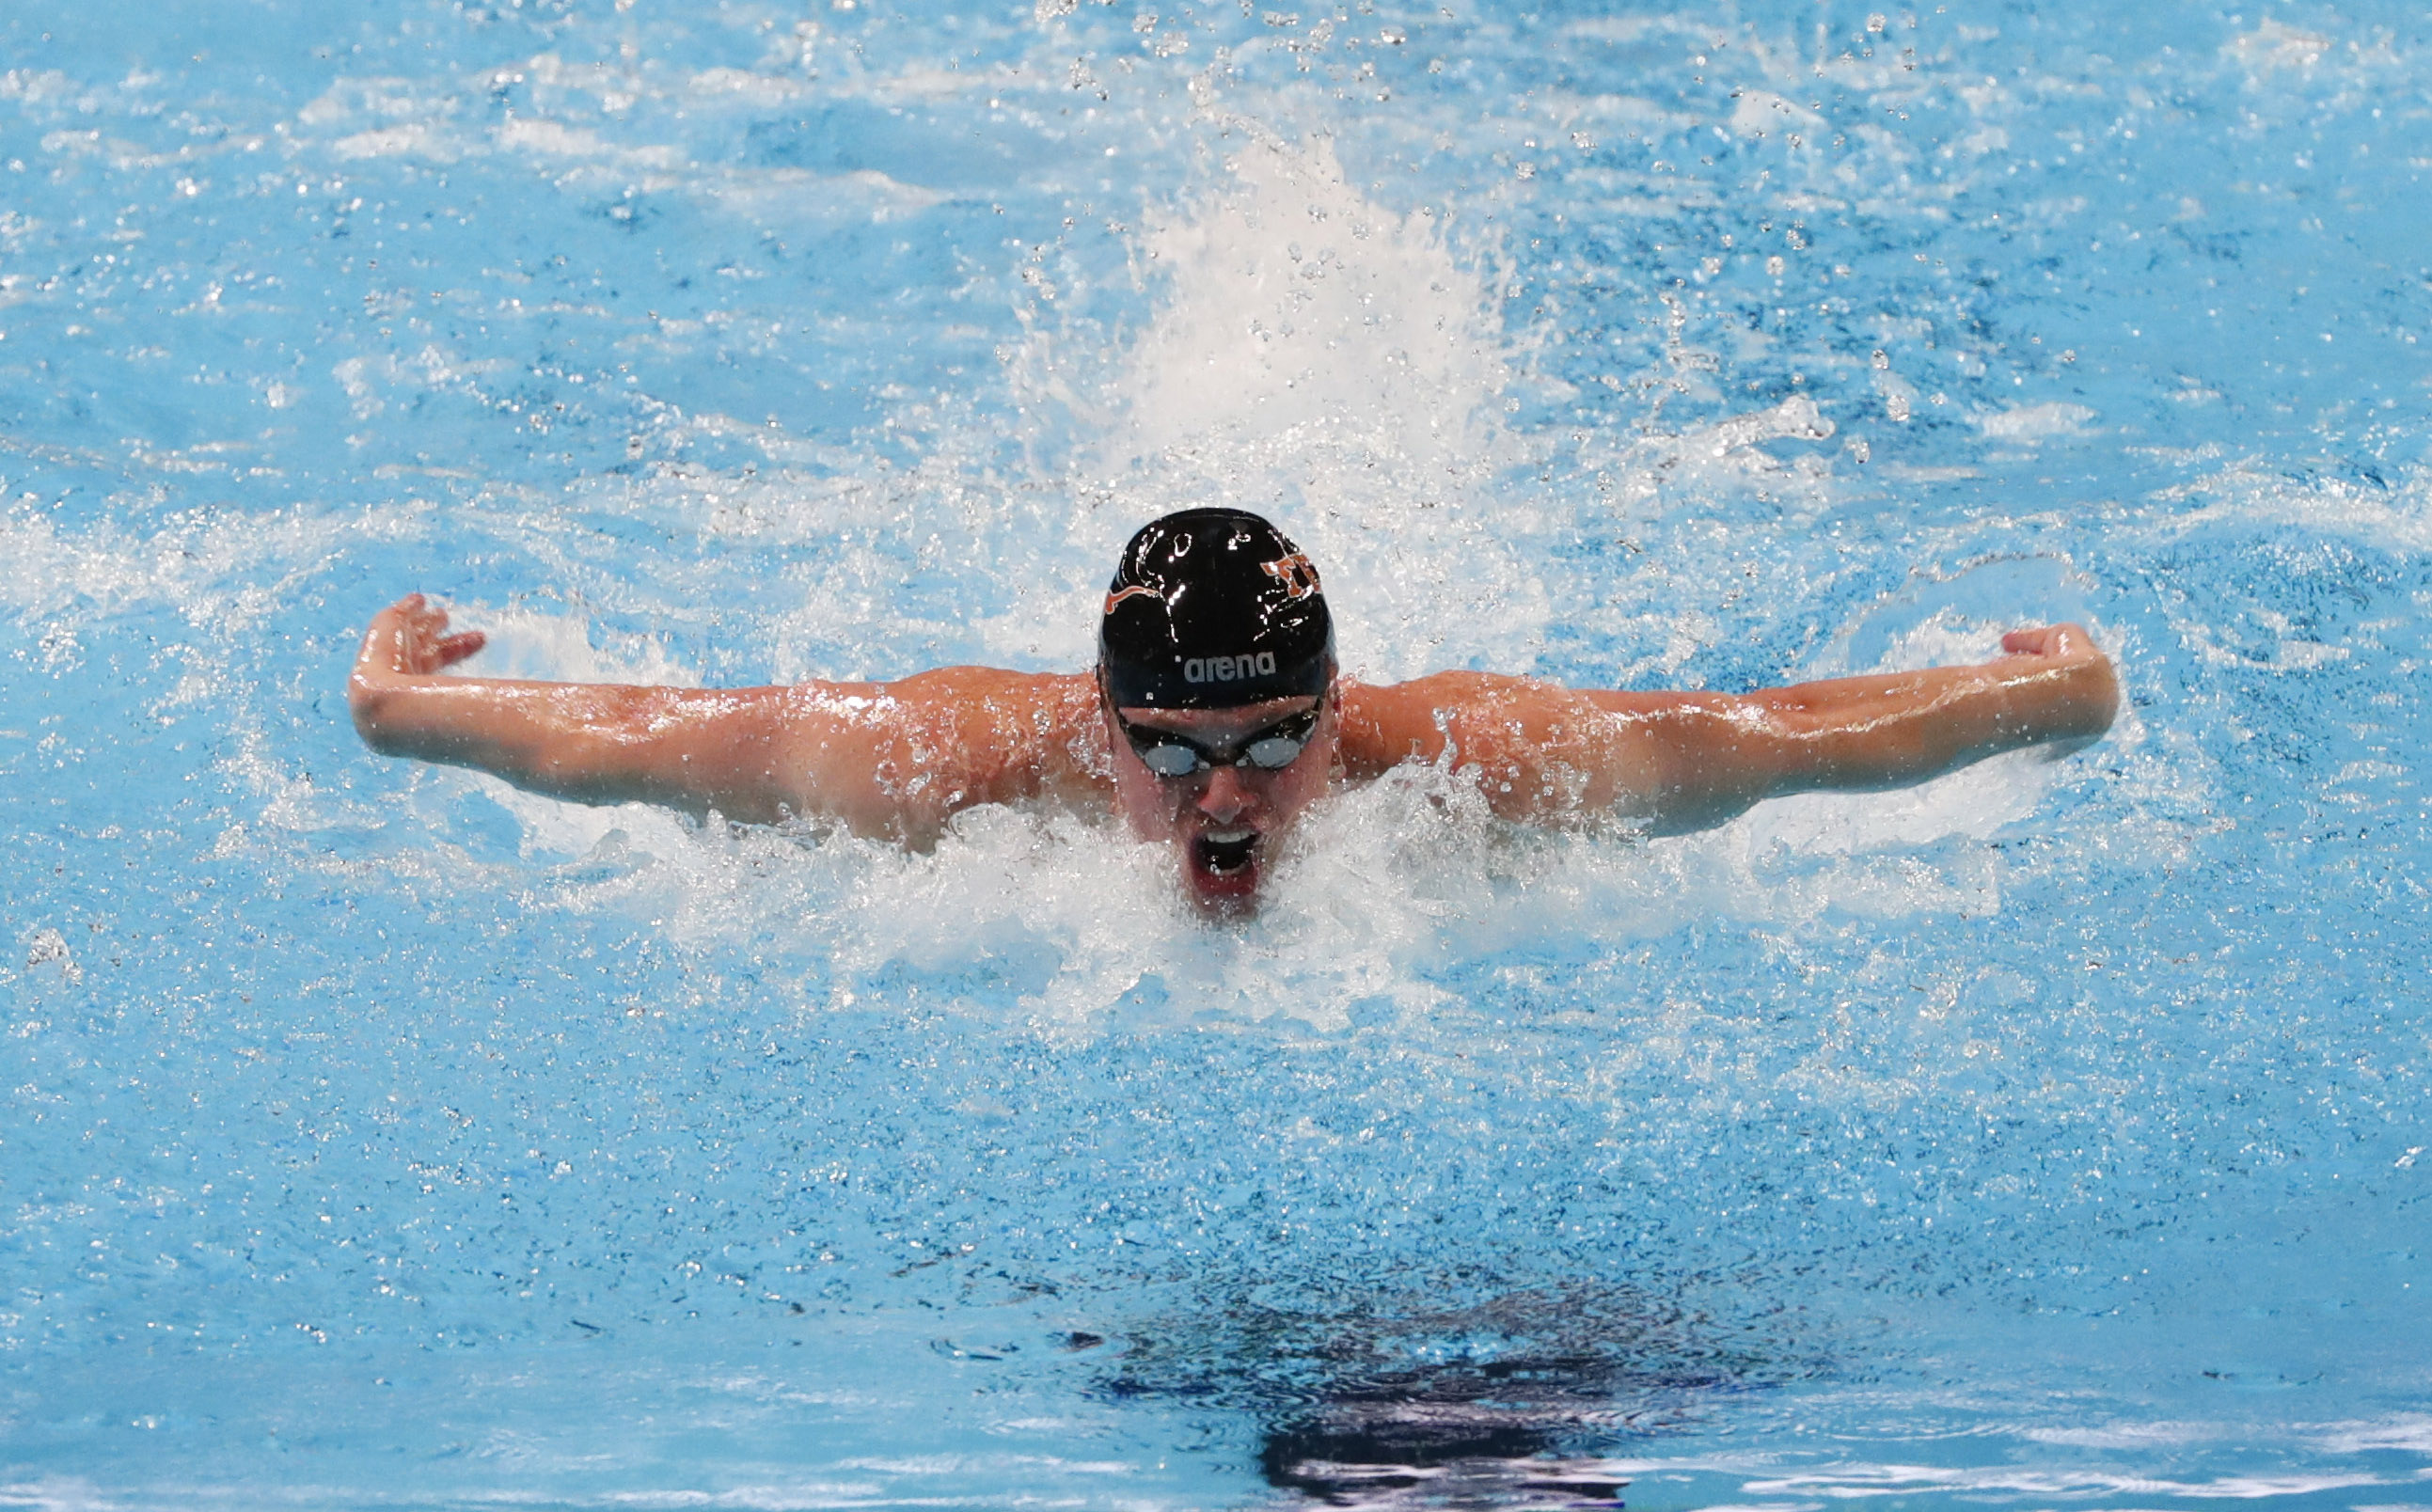 Texas Swim Wins Third Straight National Title Sets New Record